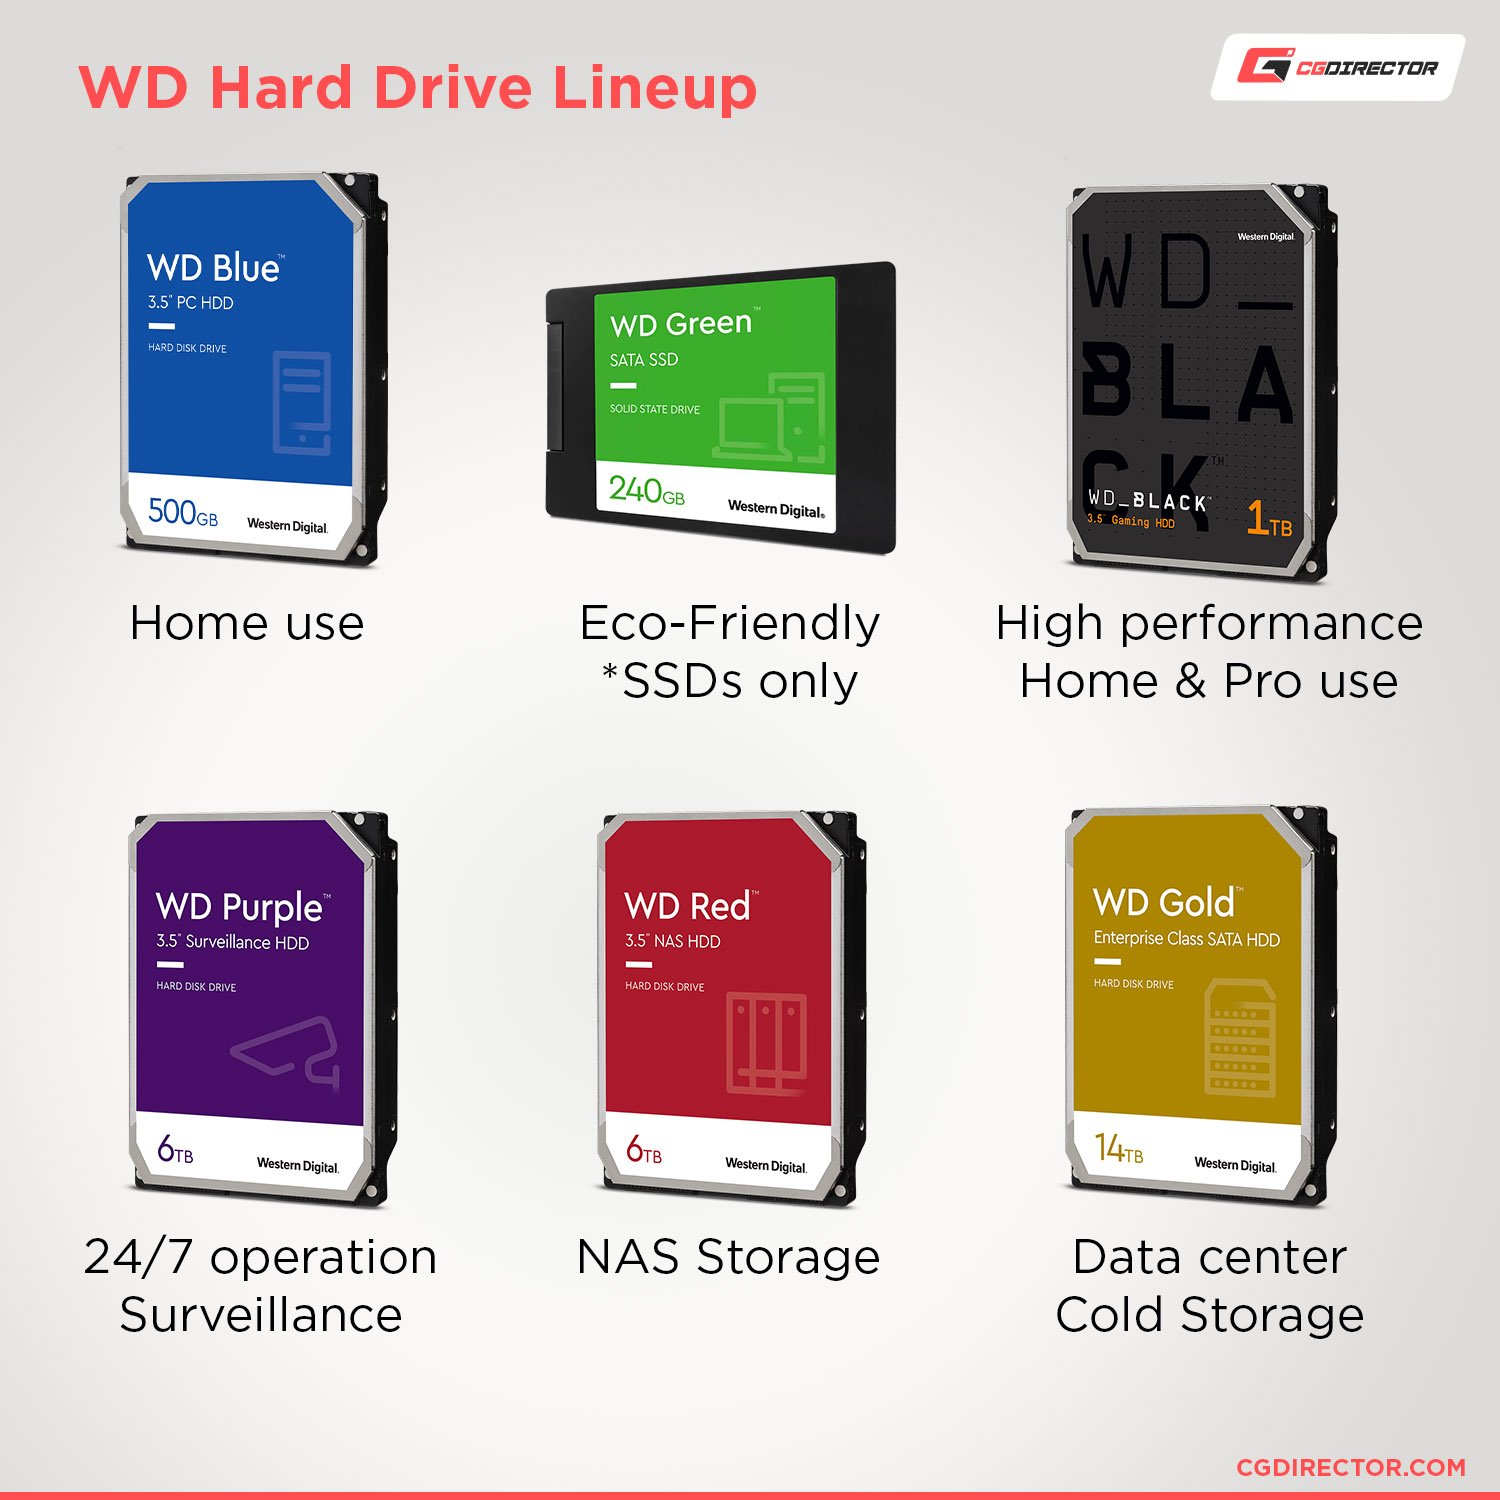 Western Digital HDD Colors - Line-up showing all colors including blue and black